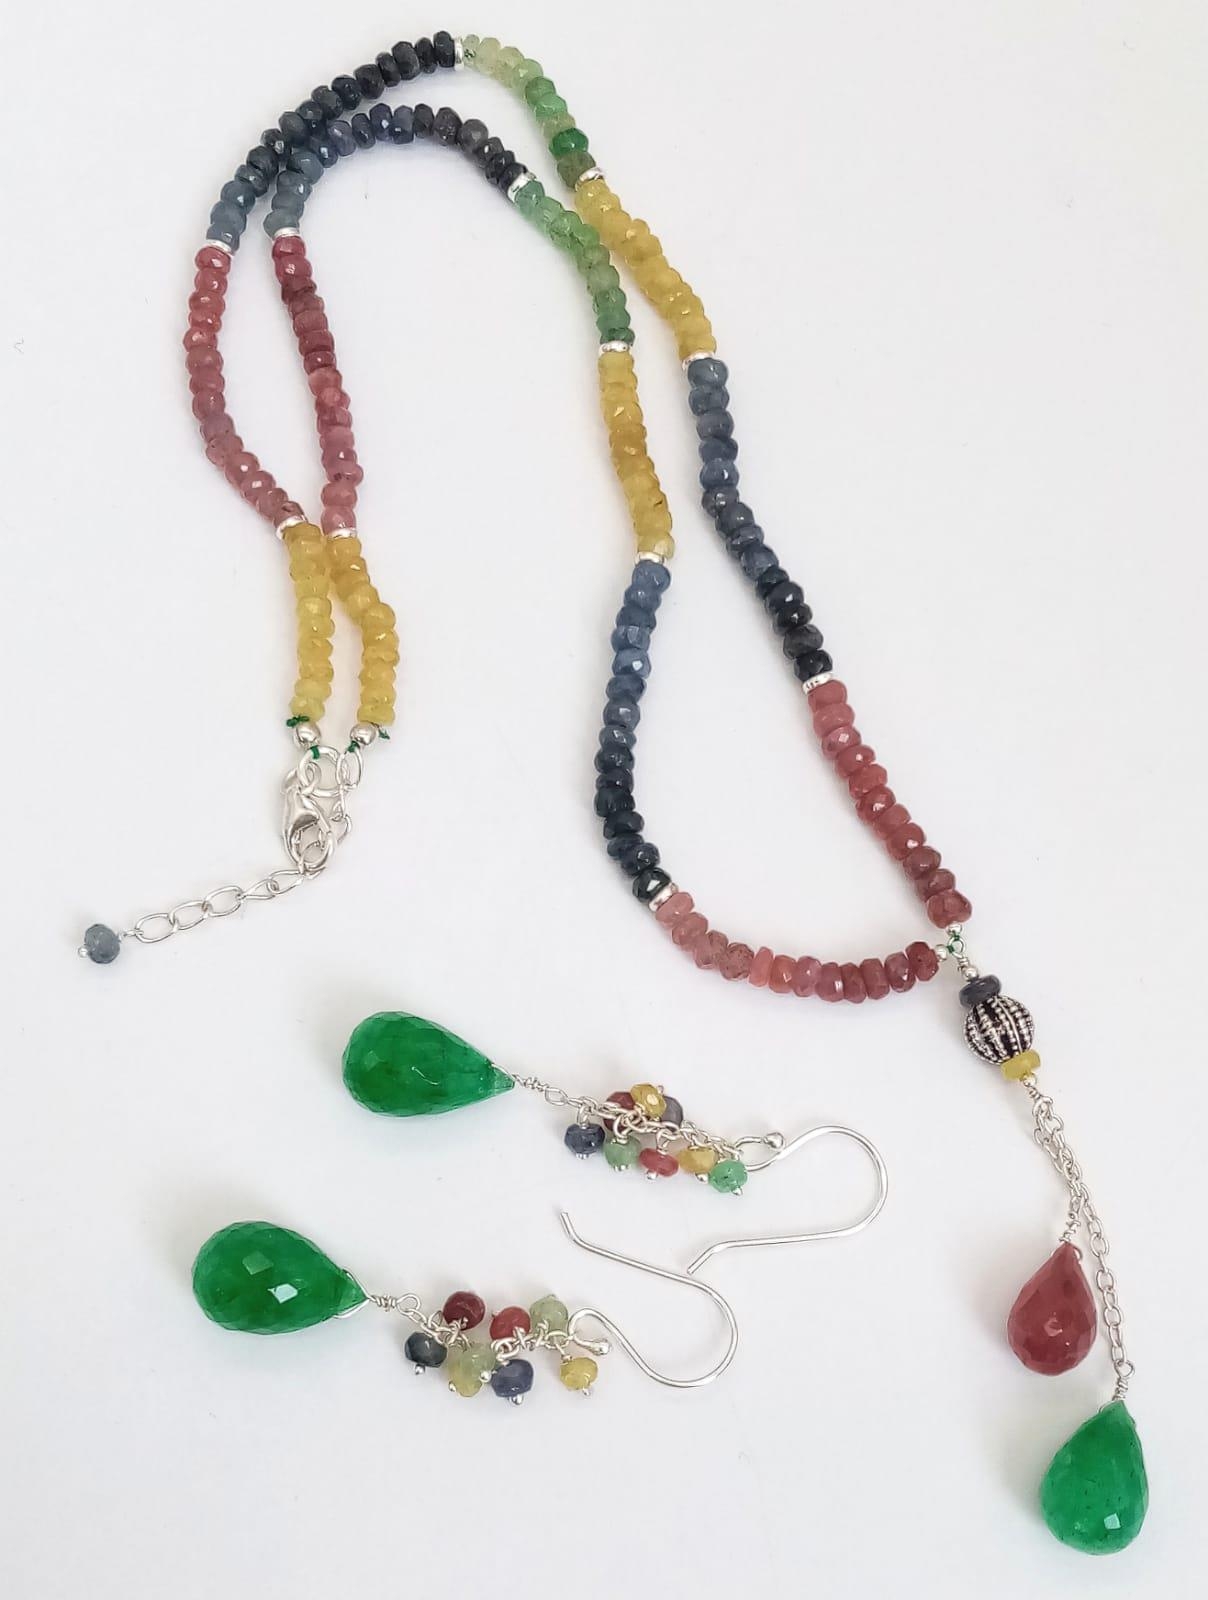 A Ruby, Emerald and Sapphire Necklace with Matching Earrings. 43.5cm necklace, 4cm drop earrings. - Image 2 of 2